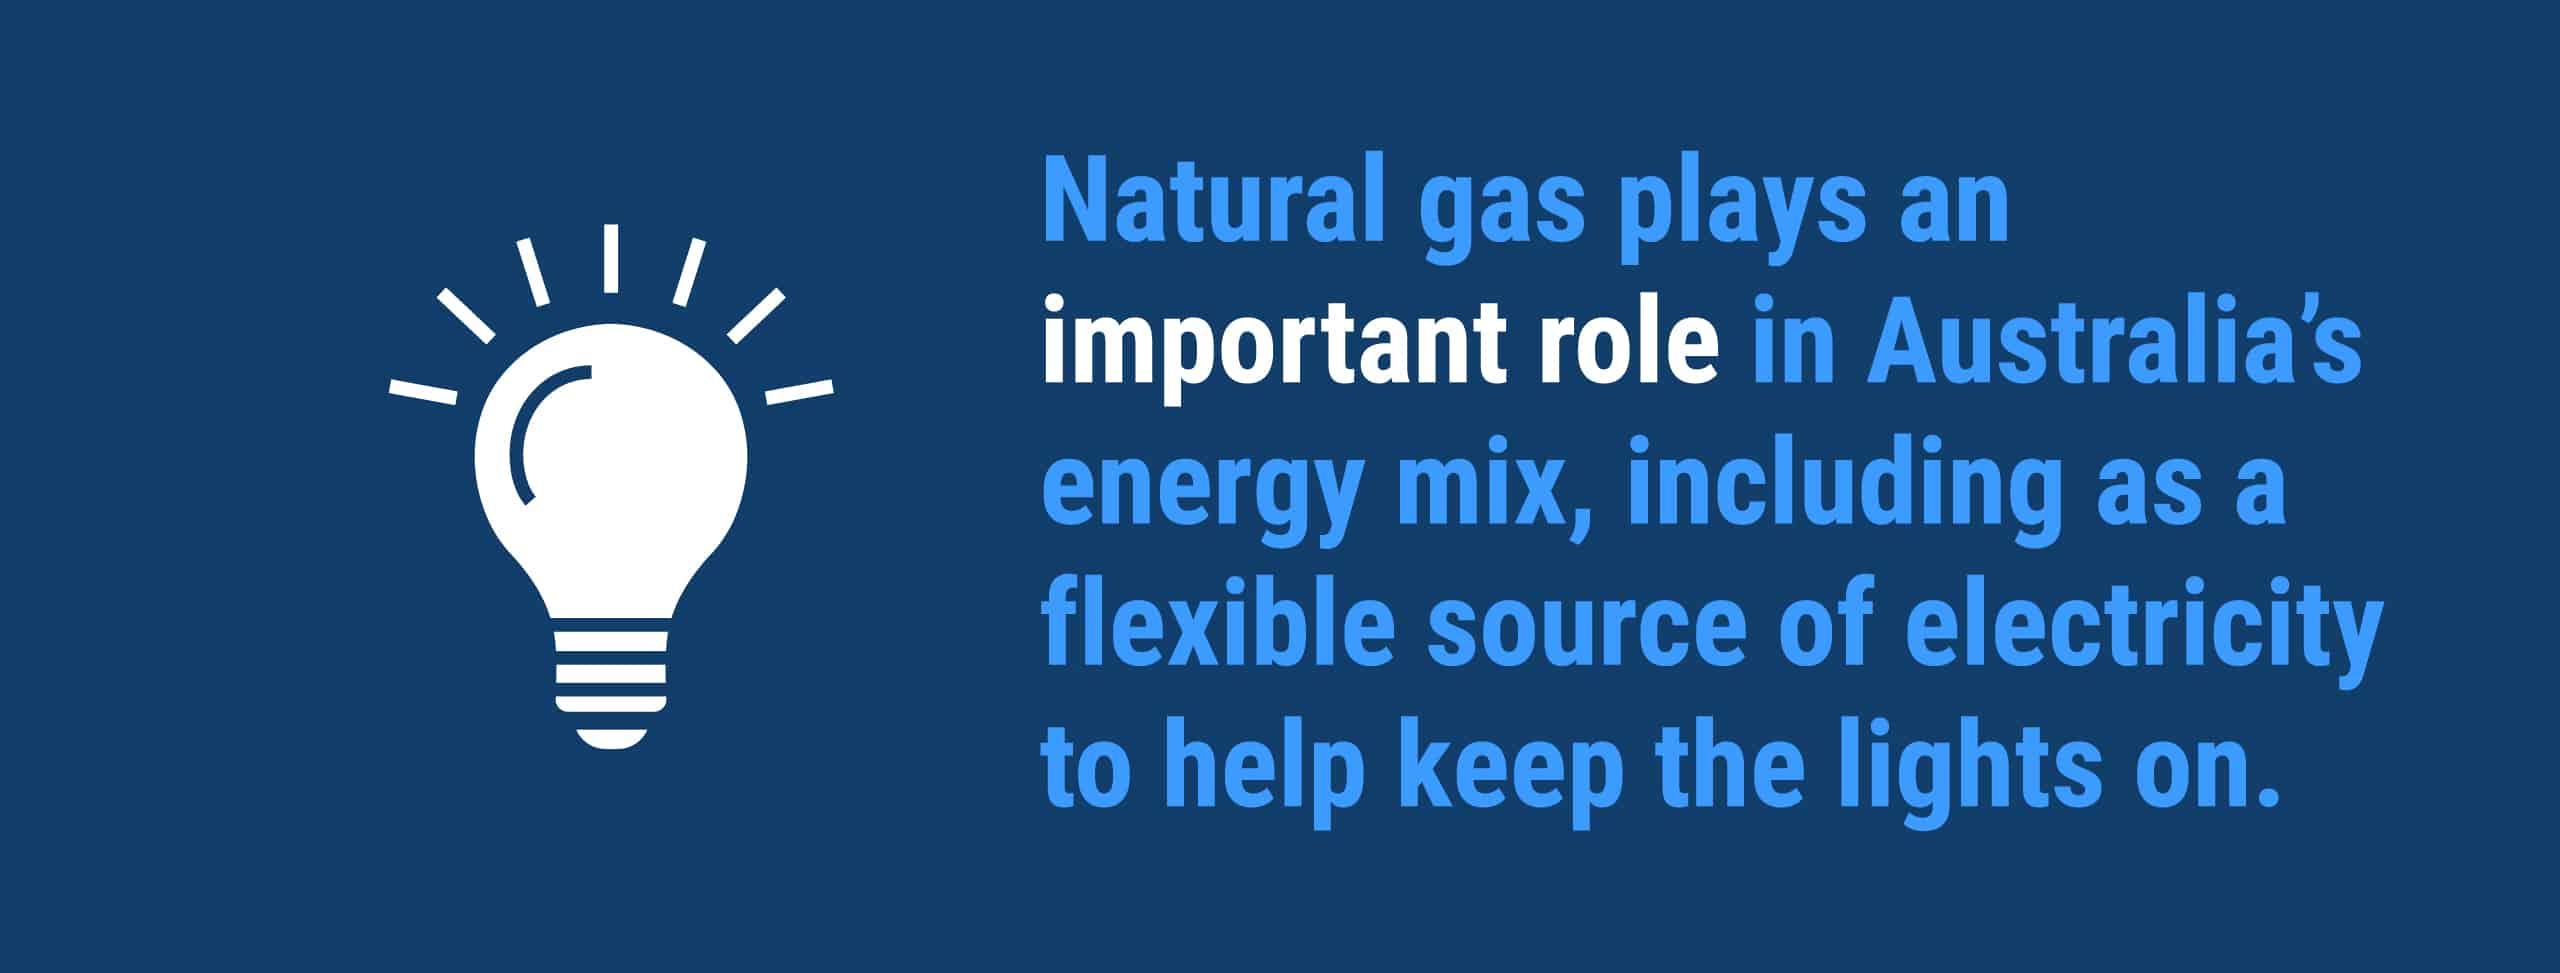 "Natural gas plays an important role in Australia’s energy mix, including as a flexible source of electricity to help keep the lights on."